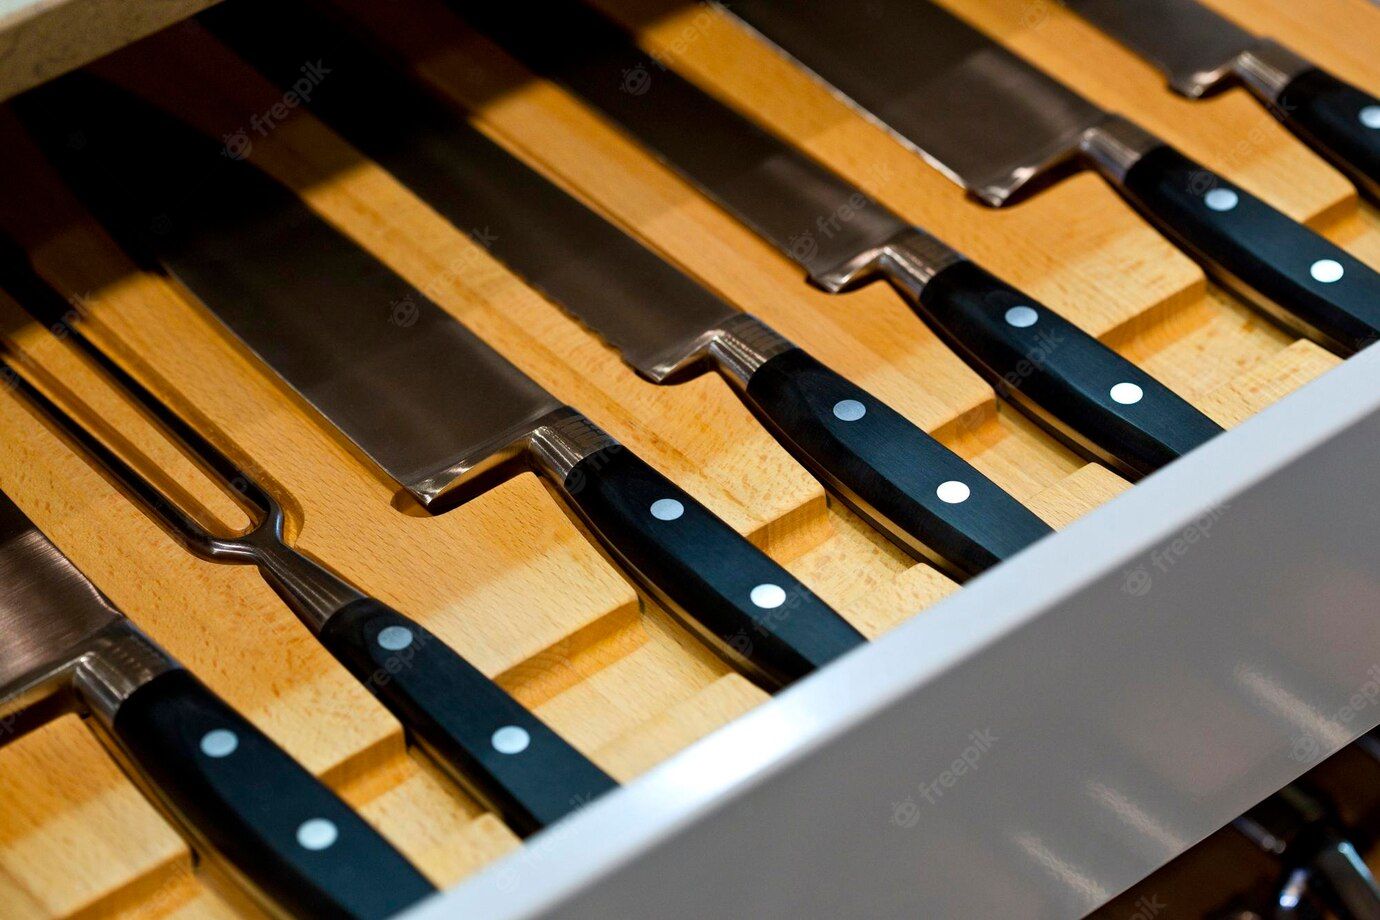 Best InDrawer Knife Storage Top 5 Picks to Store Your Knives